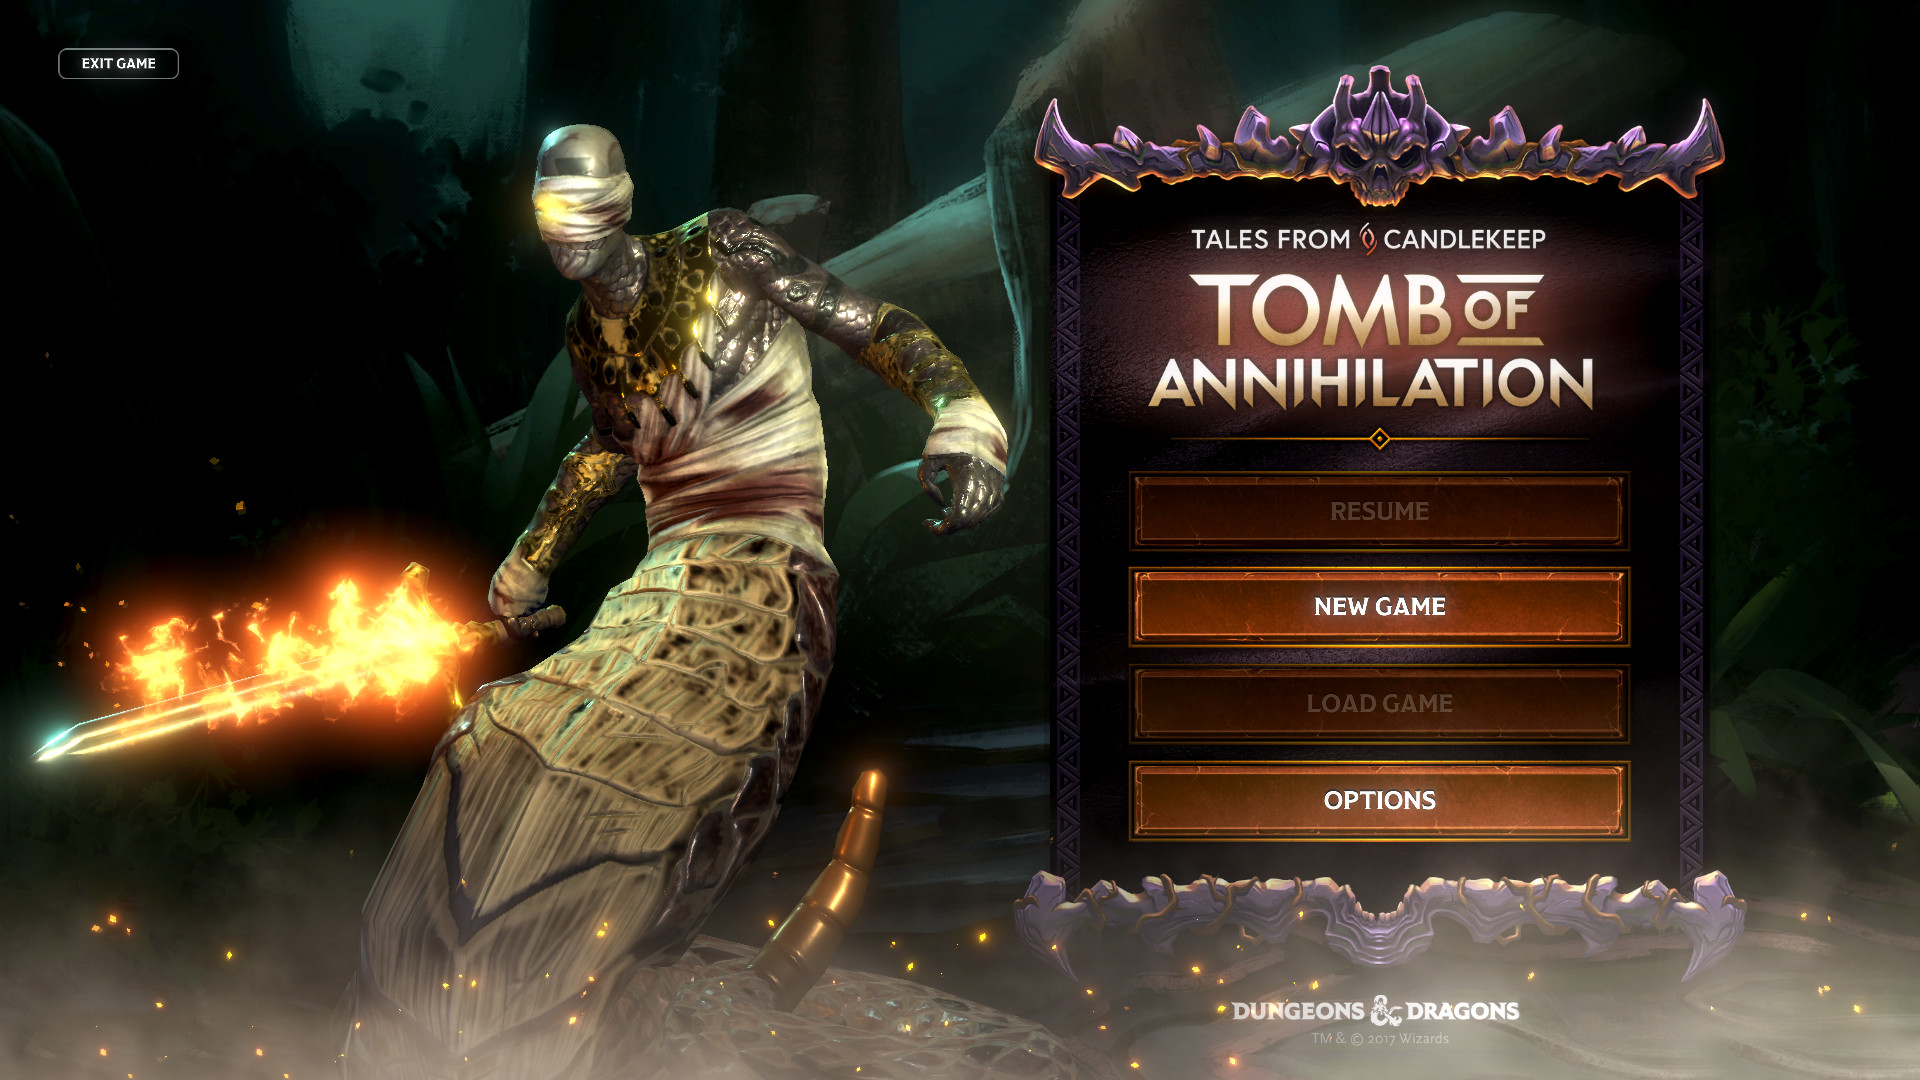 Tales from Candlekeep: Tomb of Annihilation screenshot